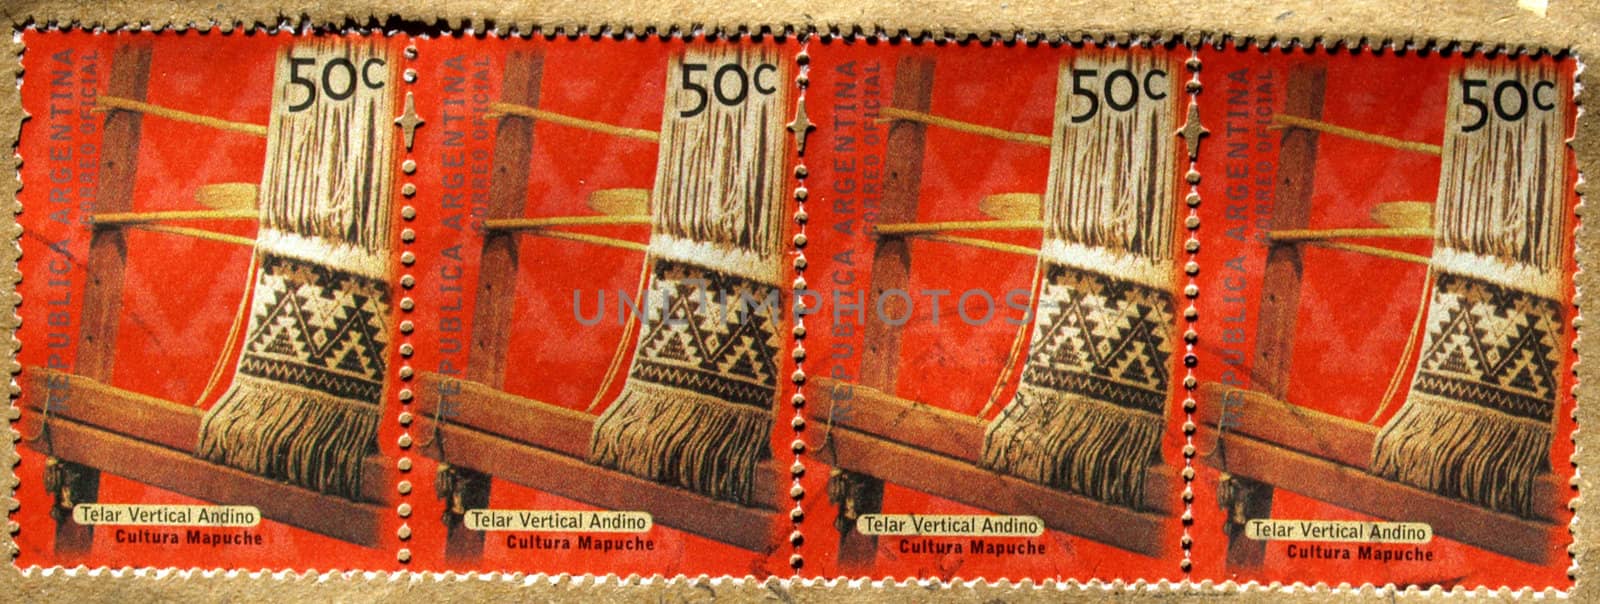 Range of postage stamps from Argentina